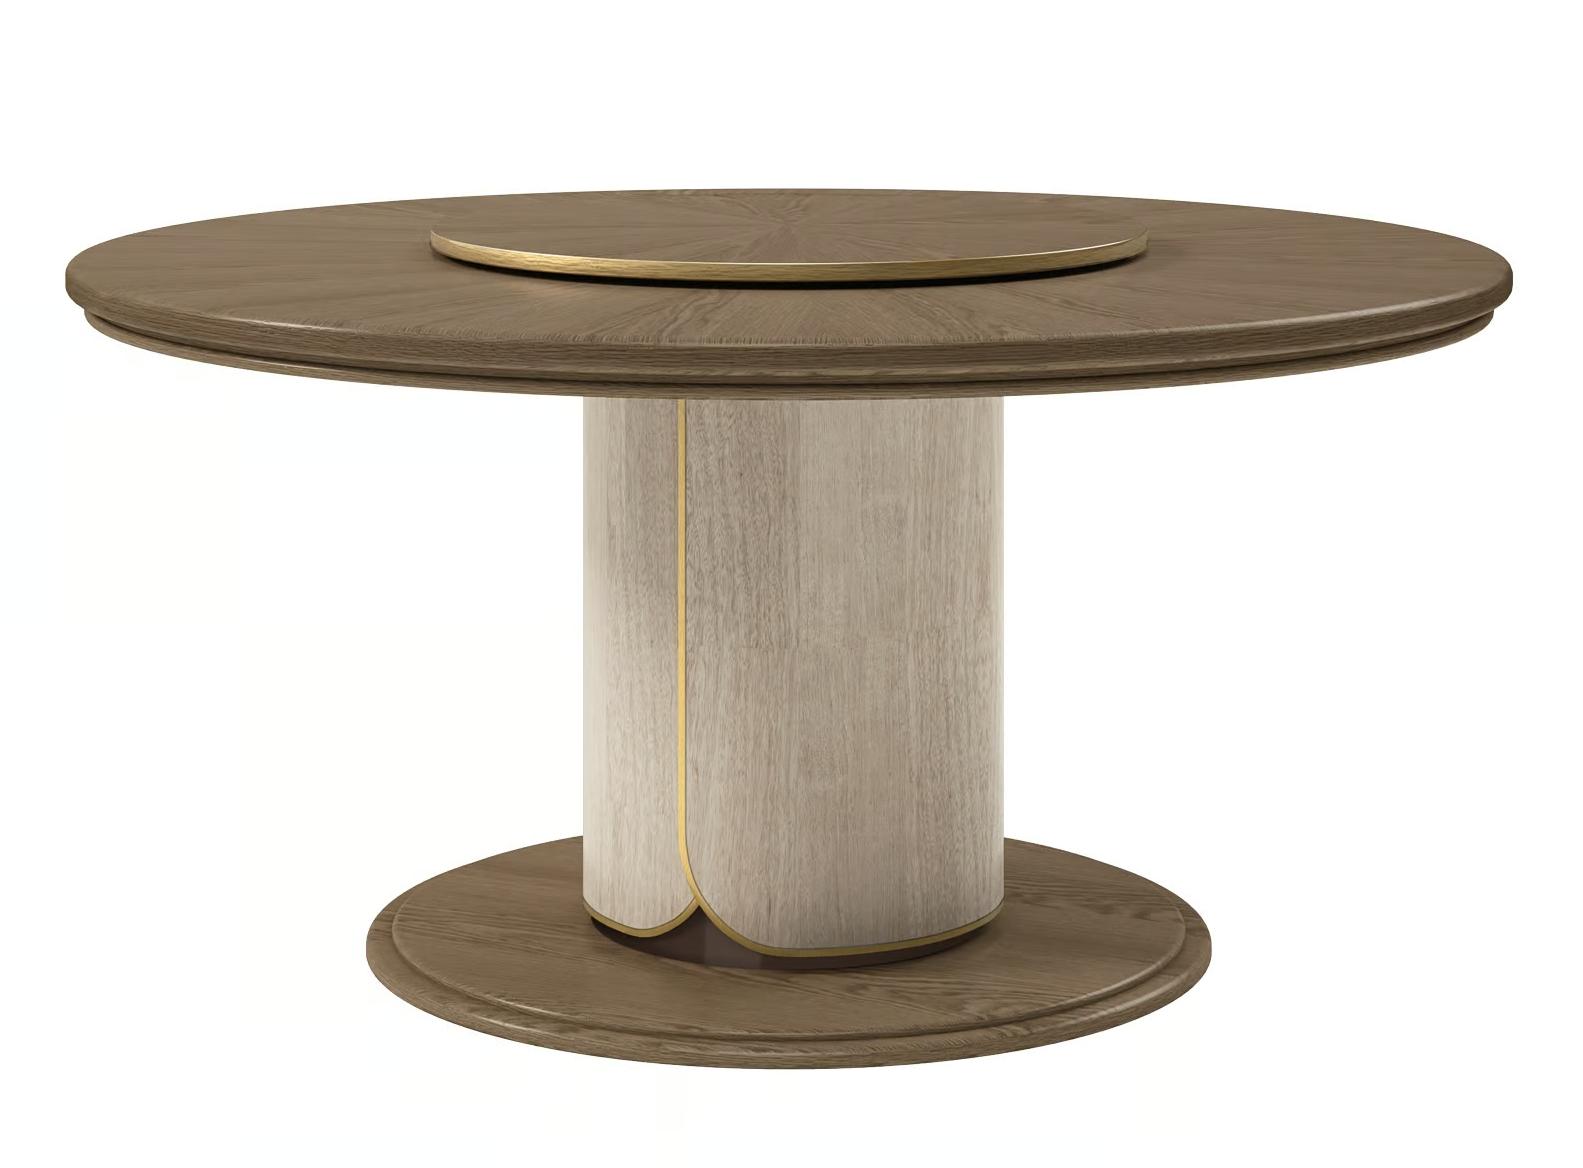 Modern Italian Round Table ☞ Configuration: With Lazy Susan